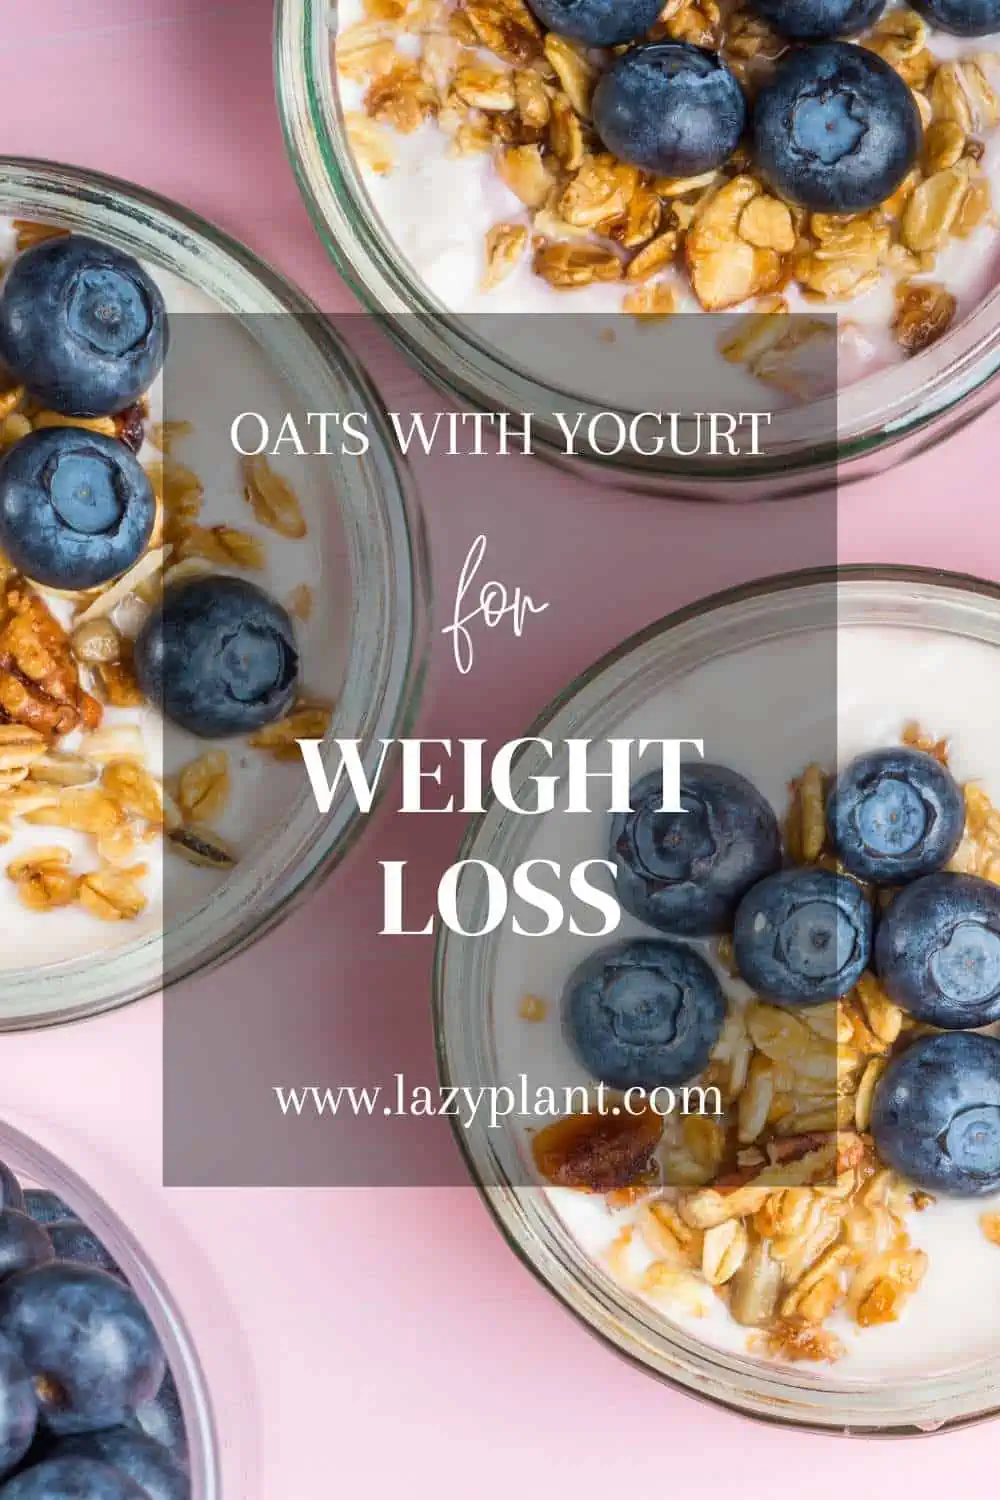 Add overnight oats to yogurt for the best weight-loss snack.